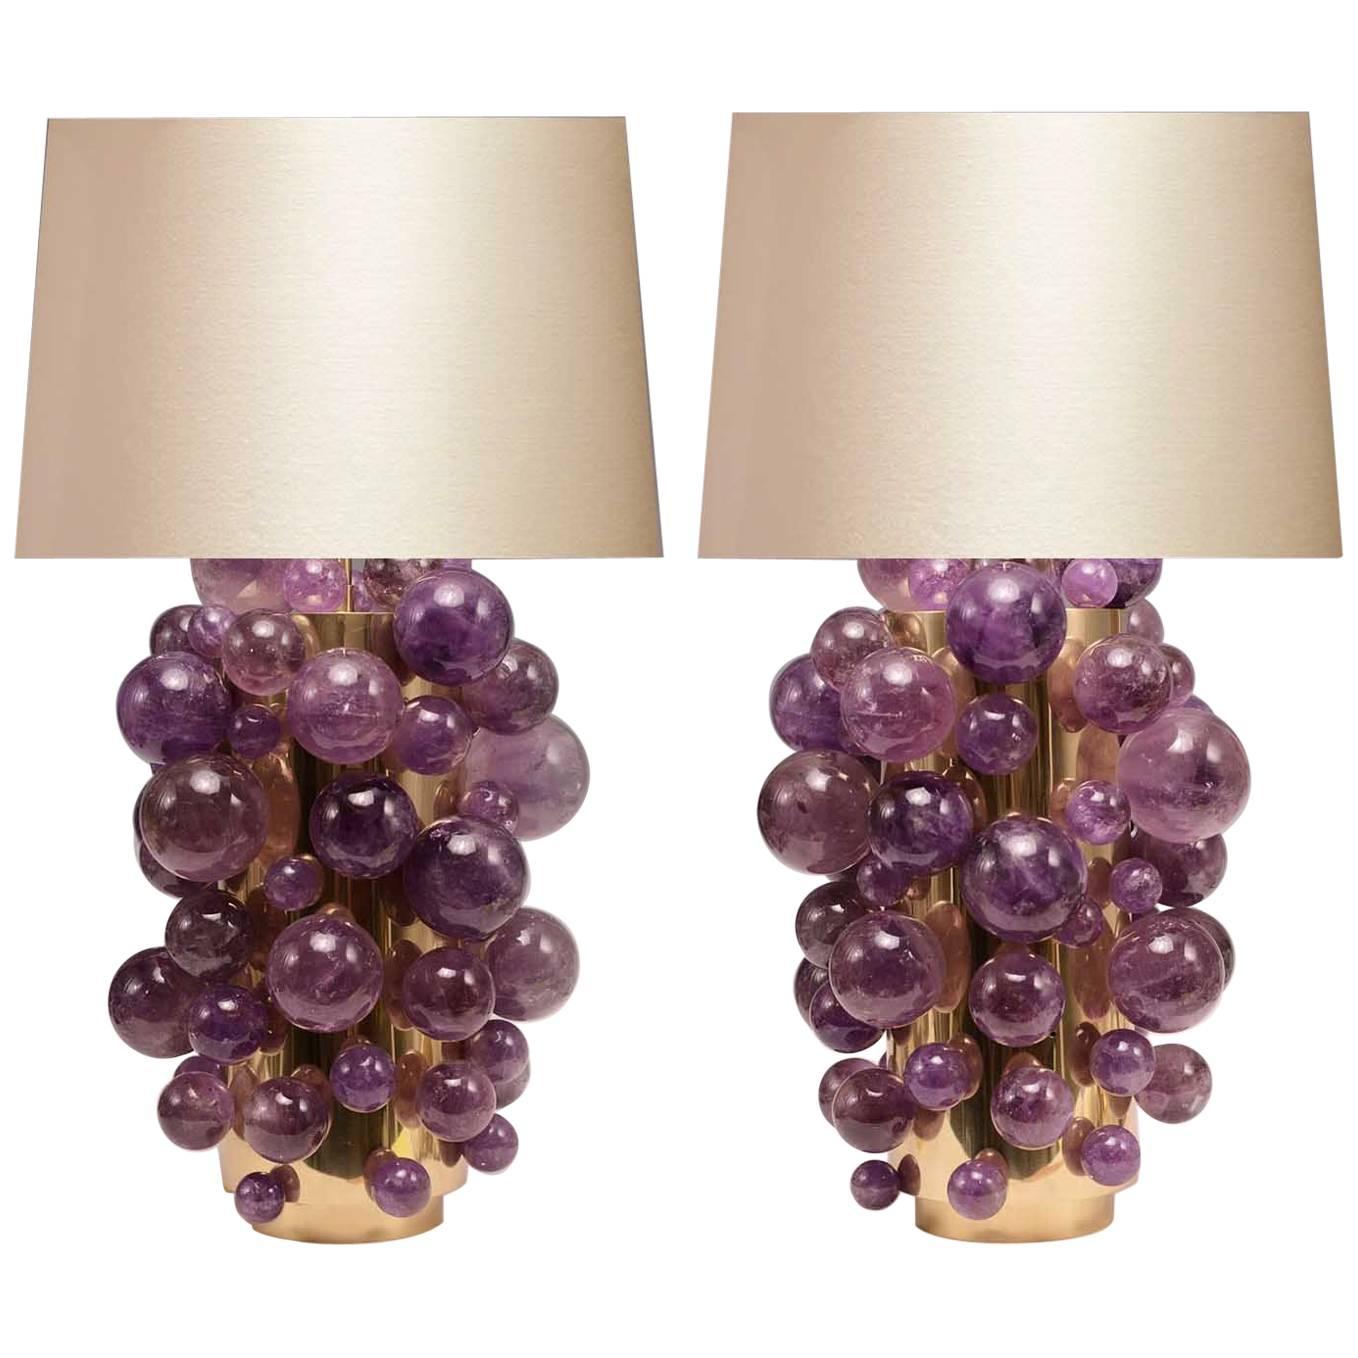 Pair of Amethyst Rock Crystal Bubble Lamps